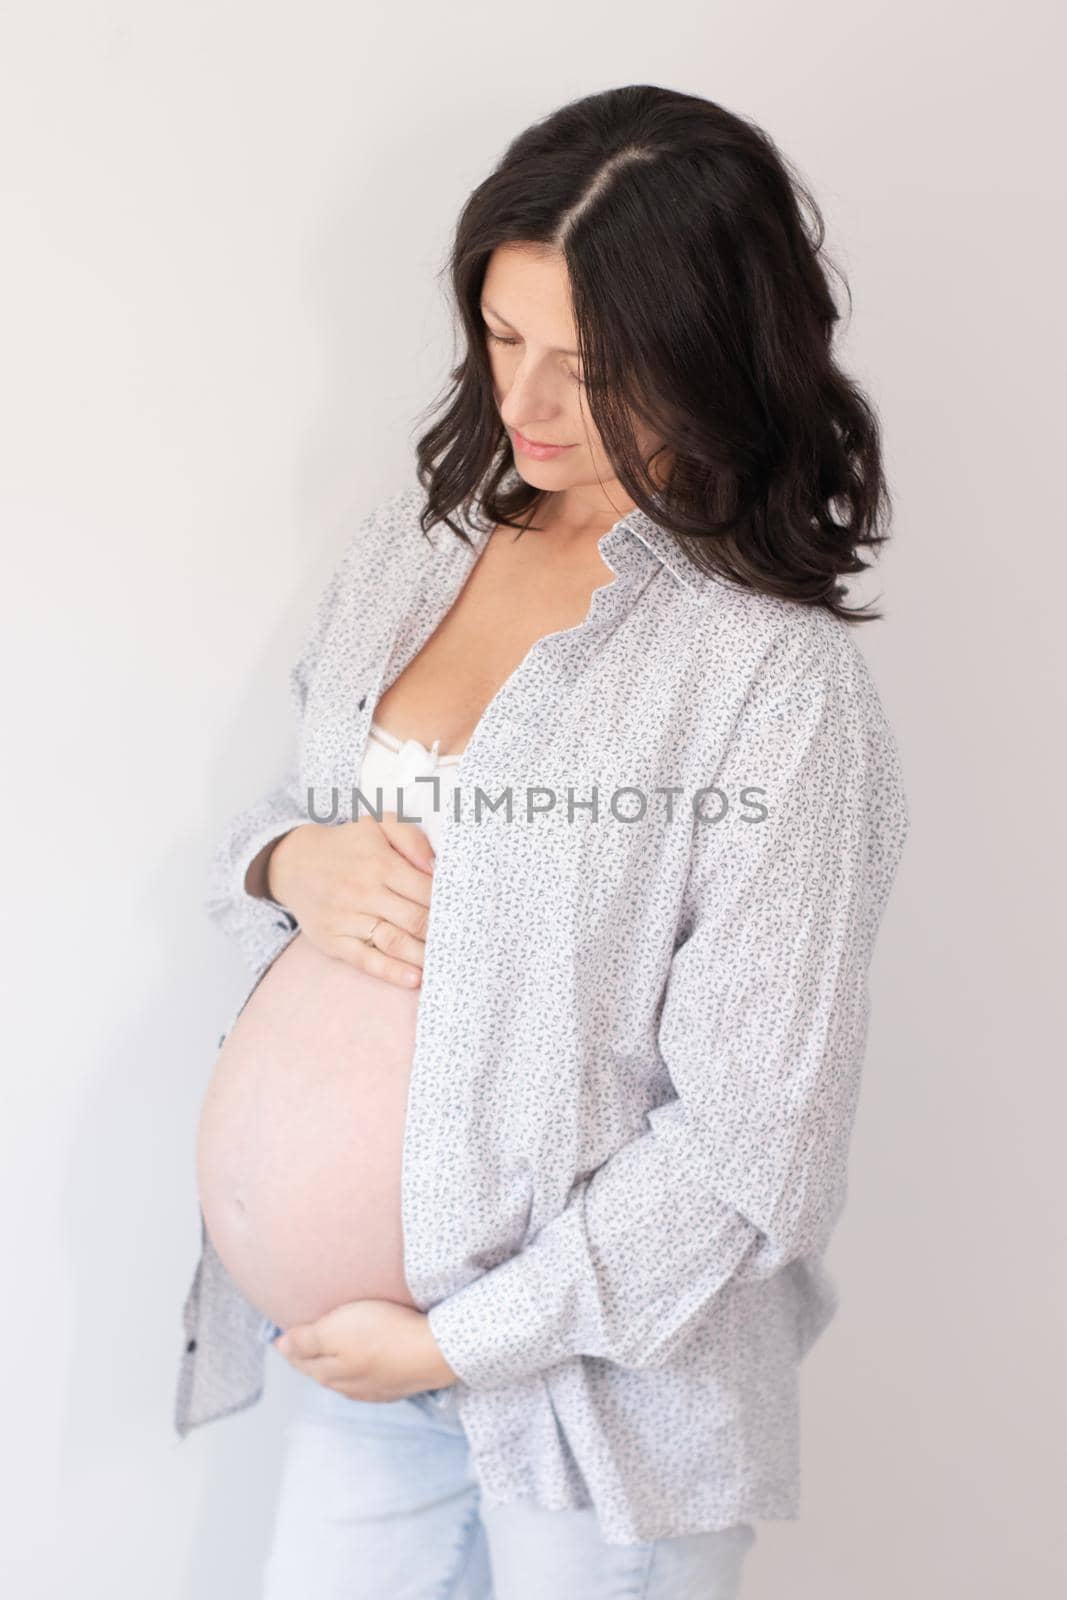 Happy expectant mother, feeling kicks, caressing big belly, smiling. Pregnant woman touching tummy, speaking to unborn baby. Motherhood, pregnancy concept by oliavesna